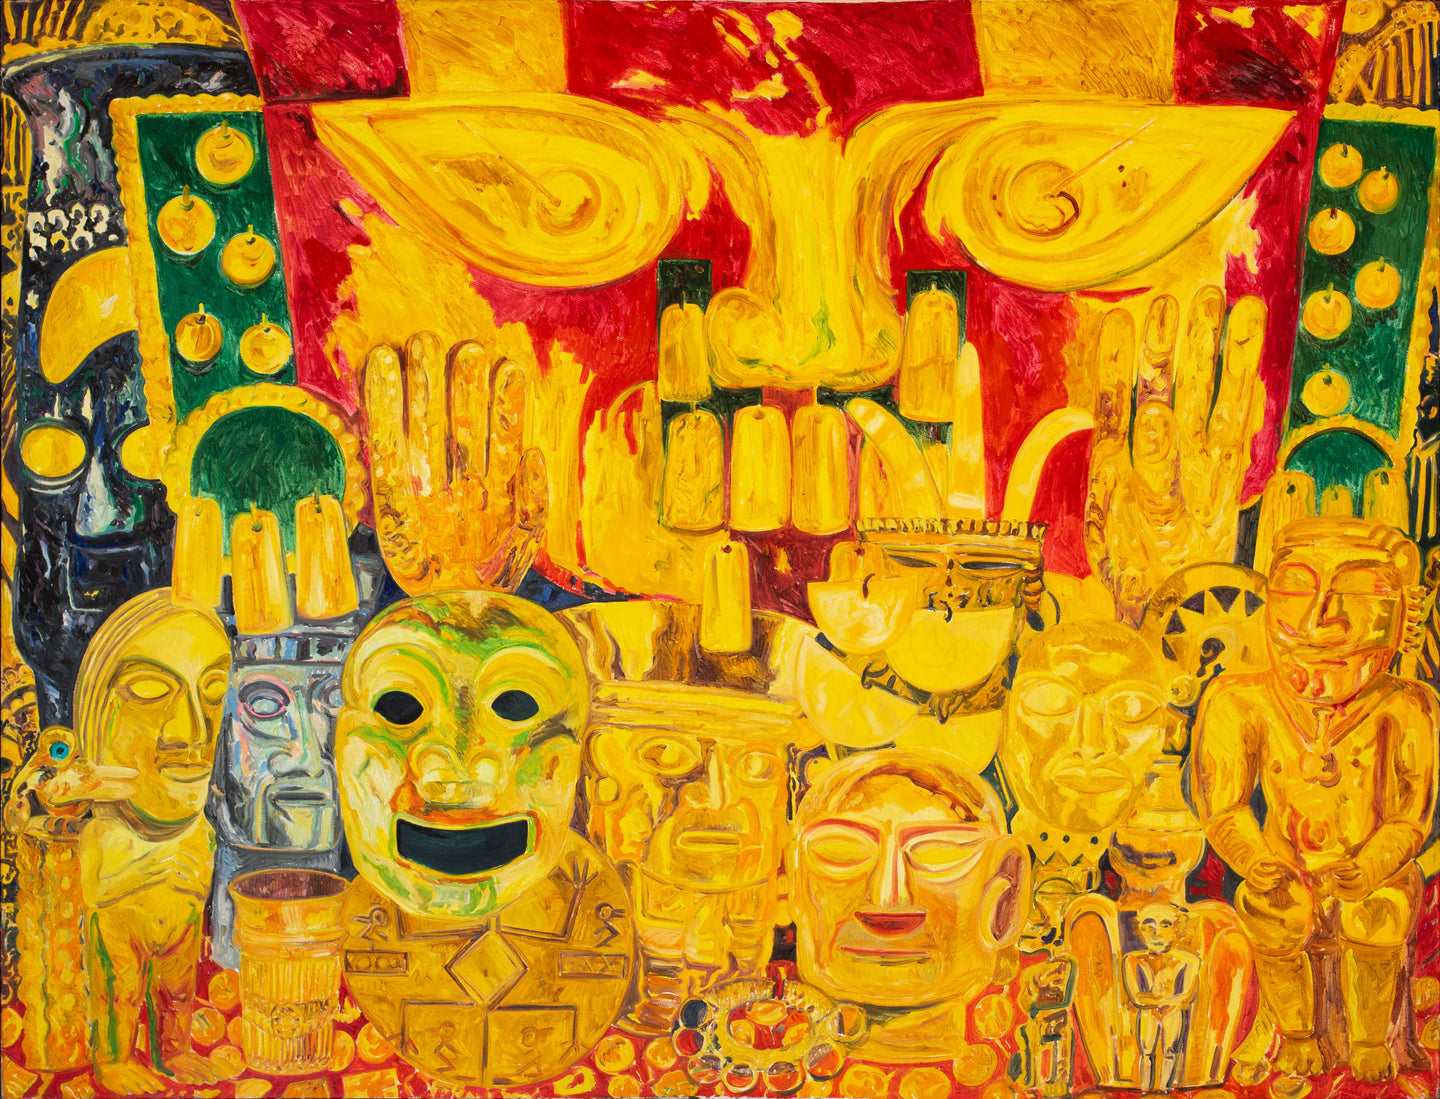 Hunt Slonem,  Red Mask, 1985,  Oil on canvas,  77 x 101 inches.  In older bodies of work, such as in the Red Mask, references to spiritually charged objects are much more apparent and literal. For example, Slonem favored depicting Catholic and Hindu saints surrounding animals early on. Available at Manolis Projects Gallery